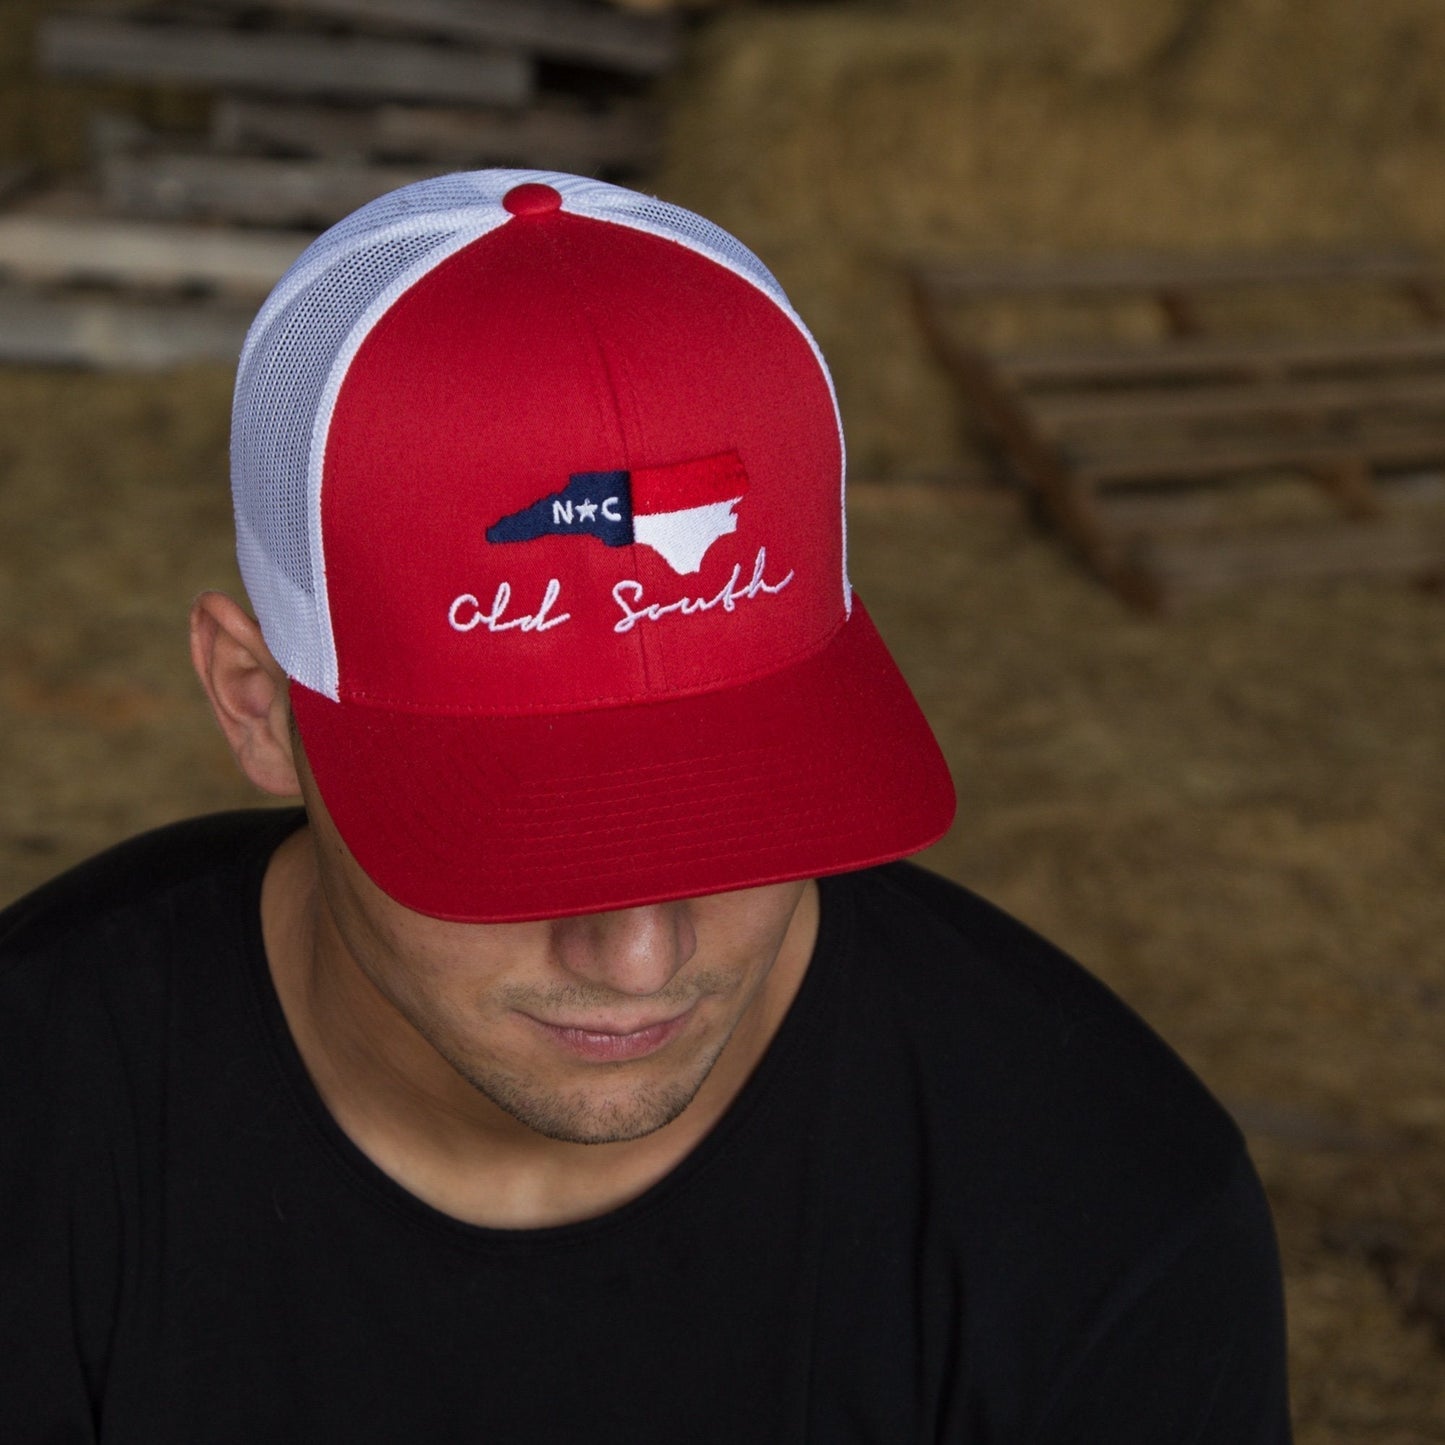 OldSouthApparel_NC - Trucker Hat